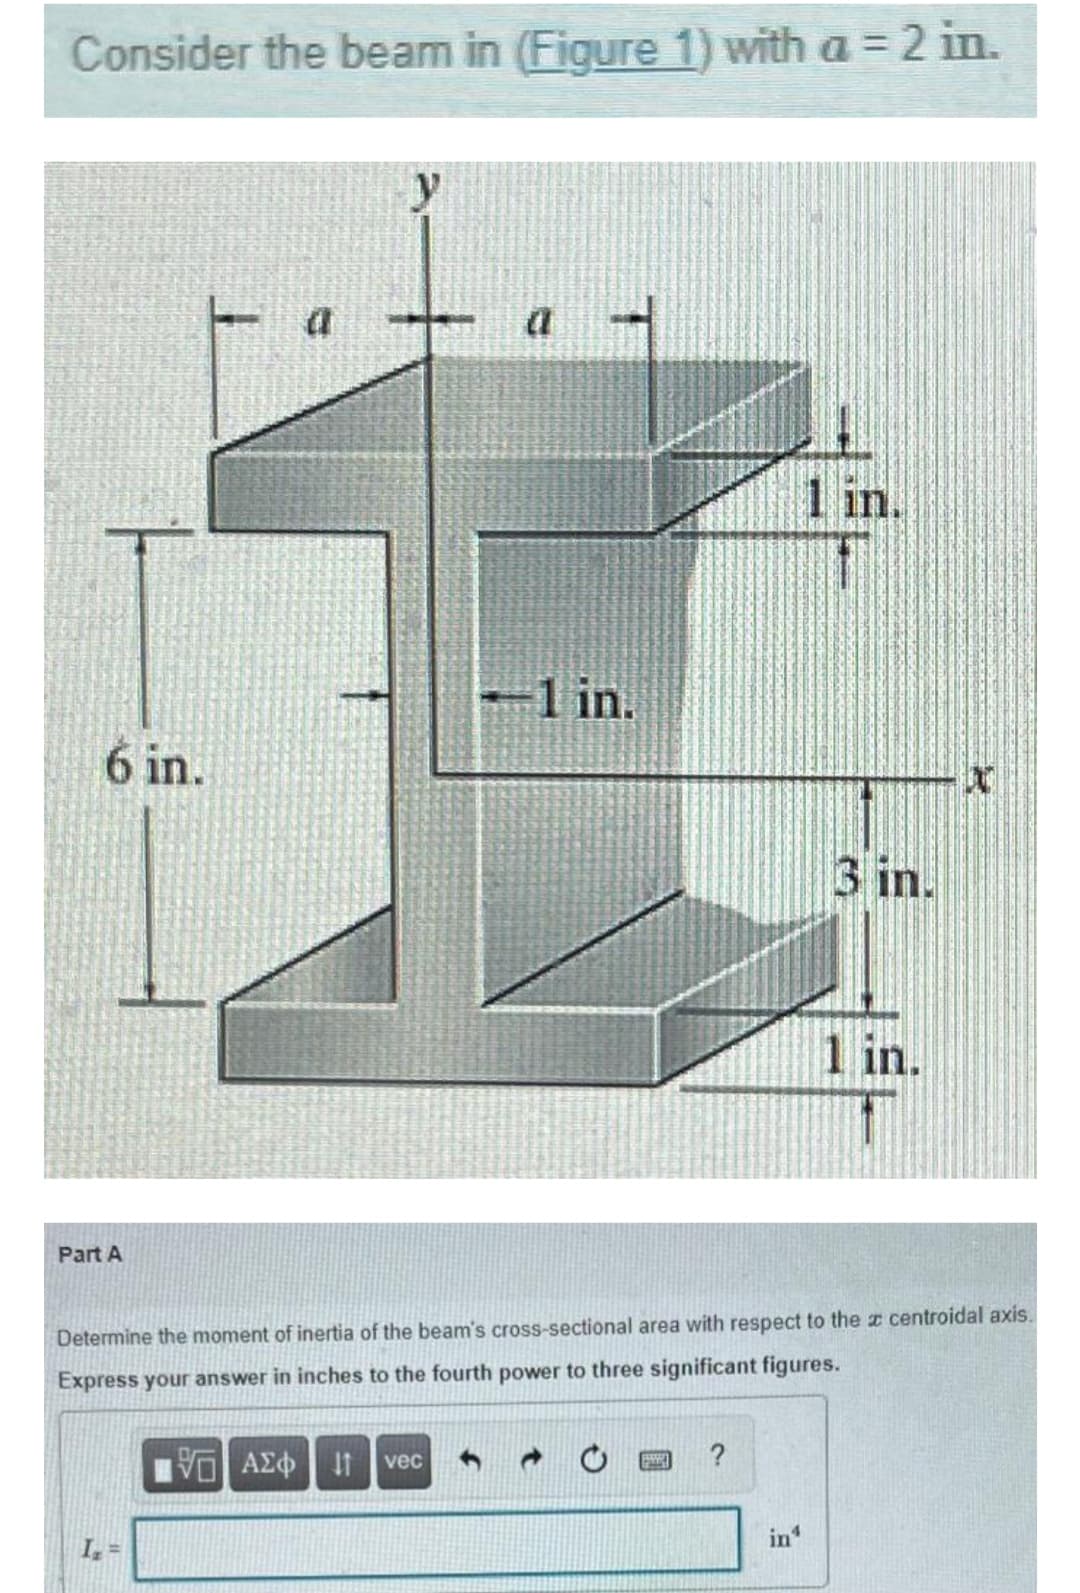 Consider the beam in (Figure 1) with a = 2 in.
y
1 in.
1 in.
6 in.
3 in.
1 in.
Part A
Determine the moment of inertia of the beam's cross-sectional area with respect to the r centroidal axis.
Express your answer in inches to the fourth power to three significant figures.
vec
?
in
I, =
